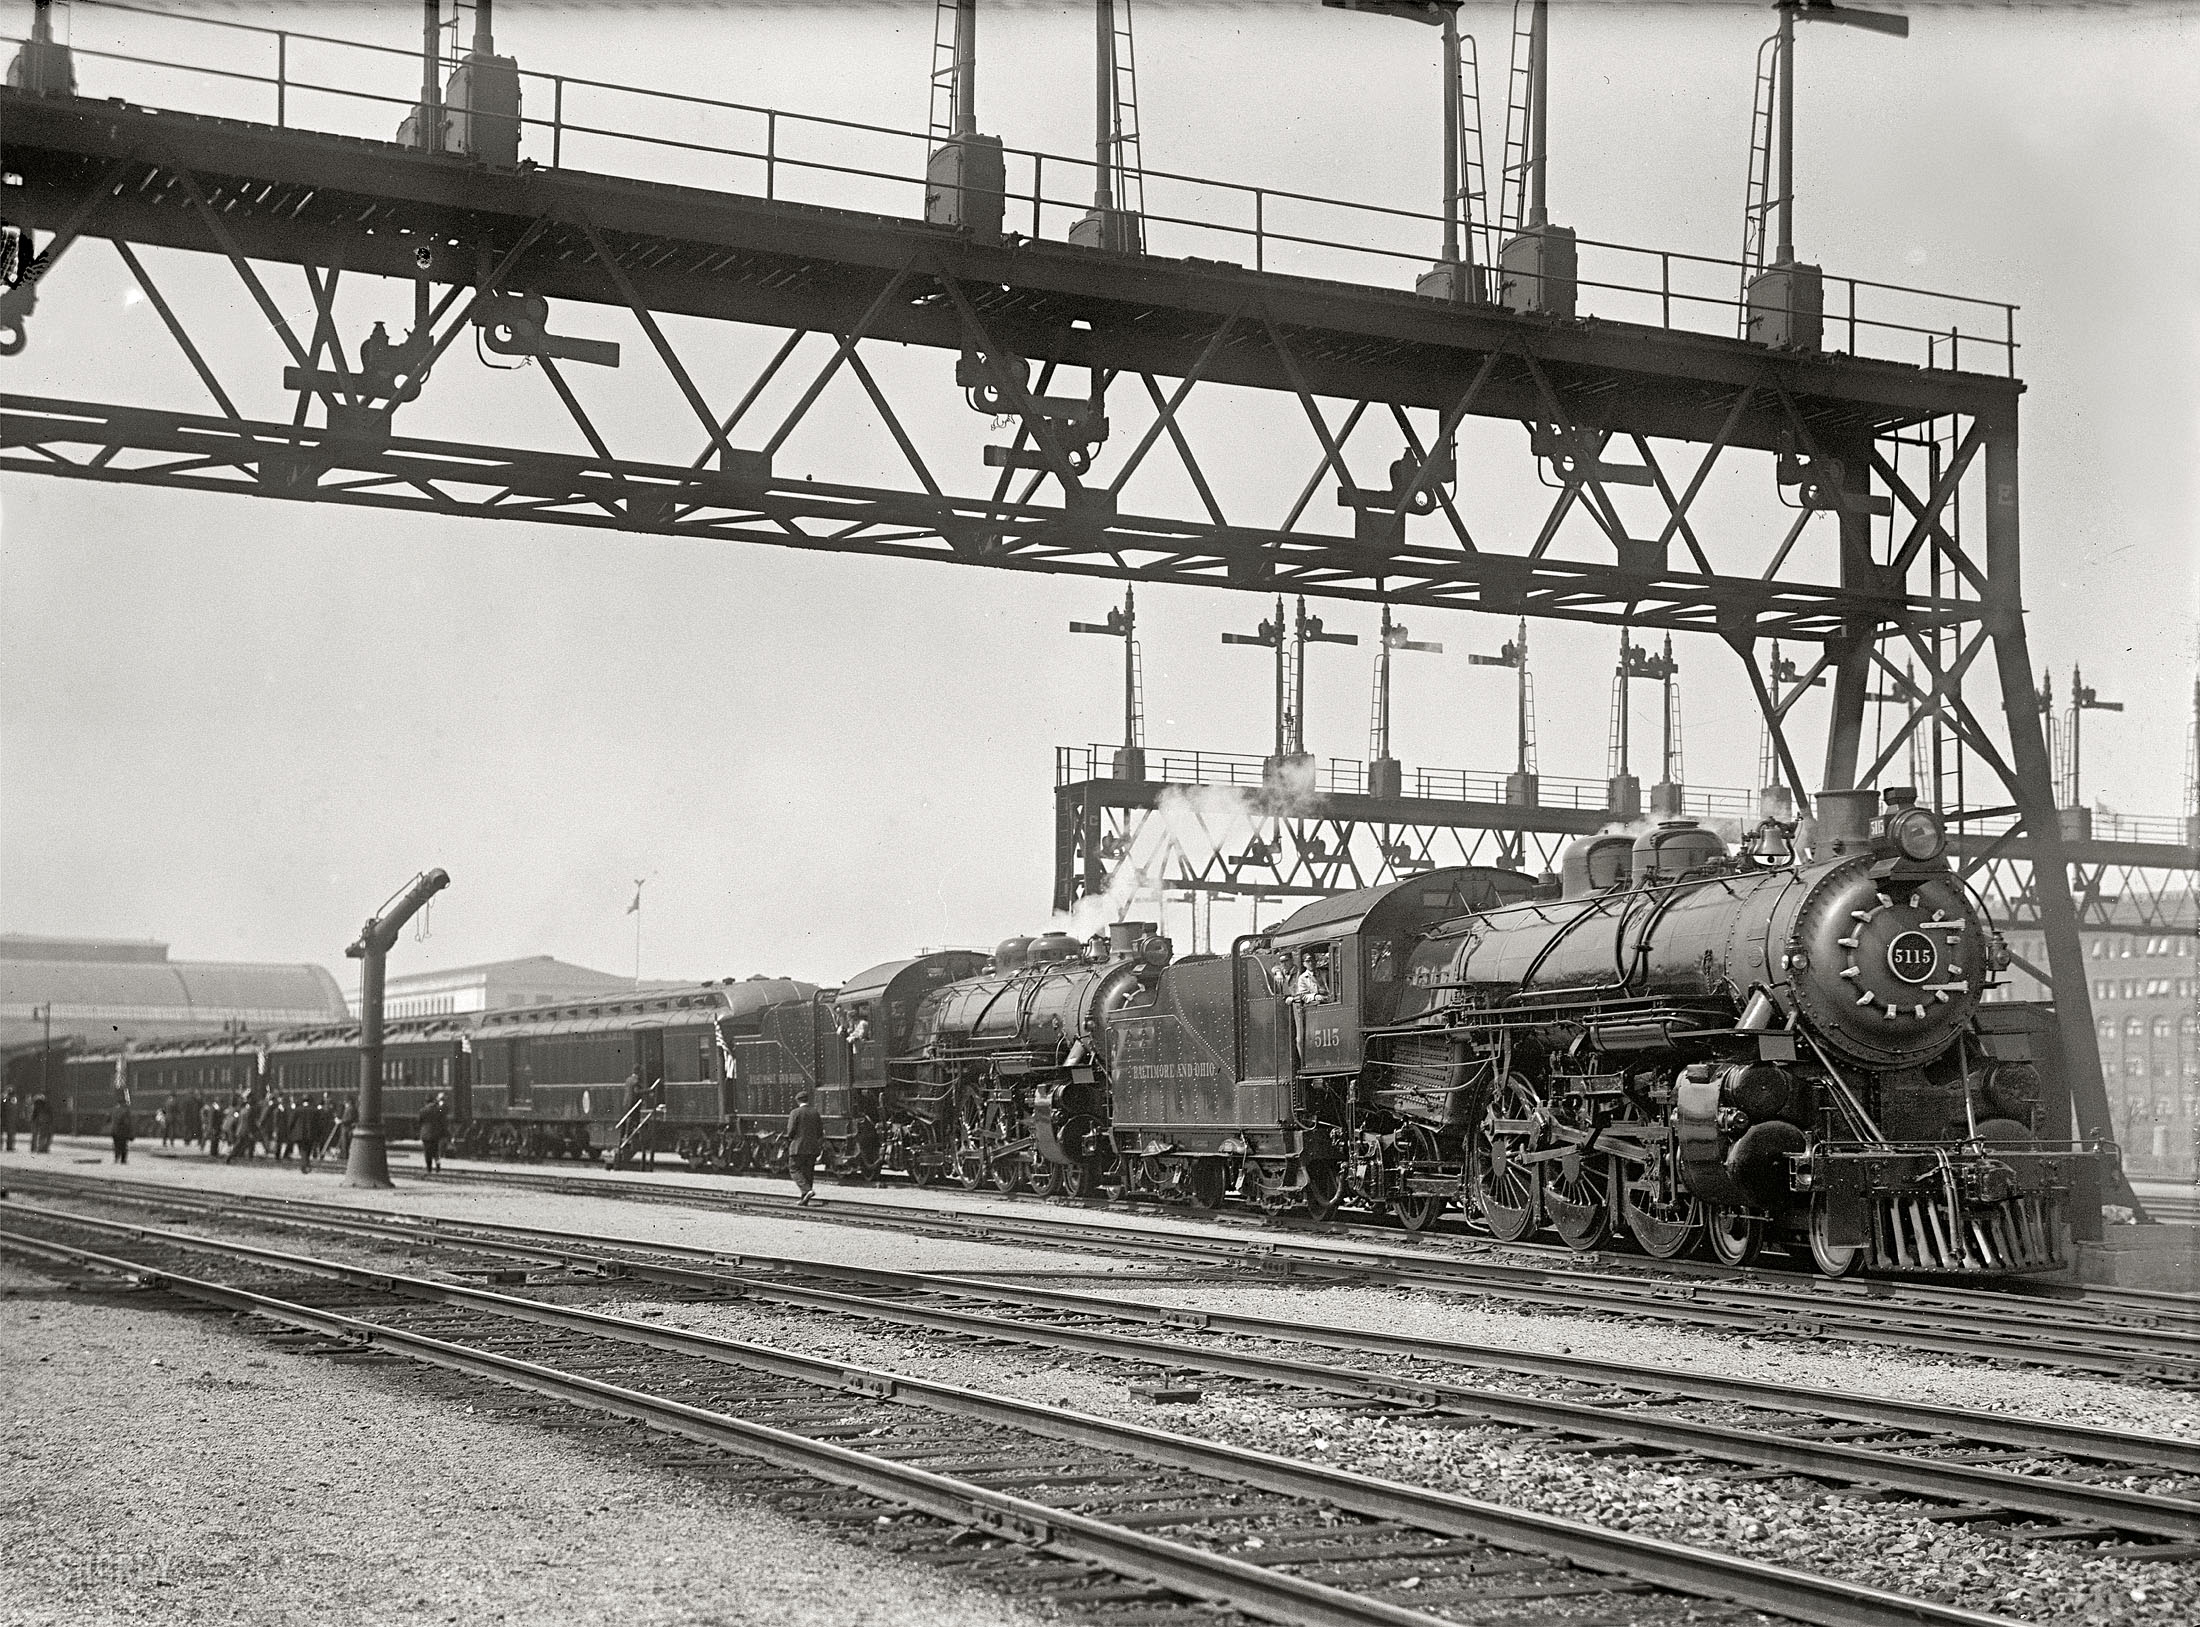 1917. "Baltimore and Ohio Railway. Safety first train." The train, according to newspaper accounts, carried exhibits "informing the public of the careful and effective means that are being taken by the government in the interest of good health, safety and preparedness." Shown here at Union Station in Washington. Harris & Ewing Collection glass negative. View full size.